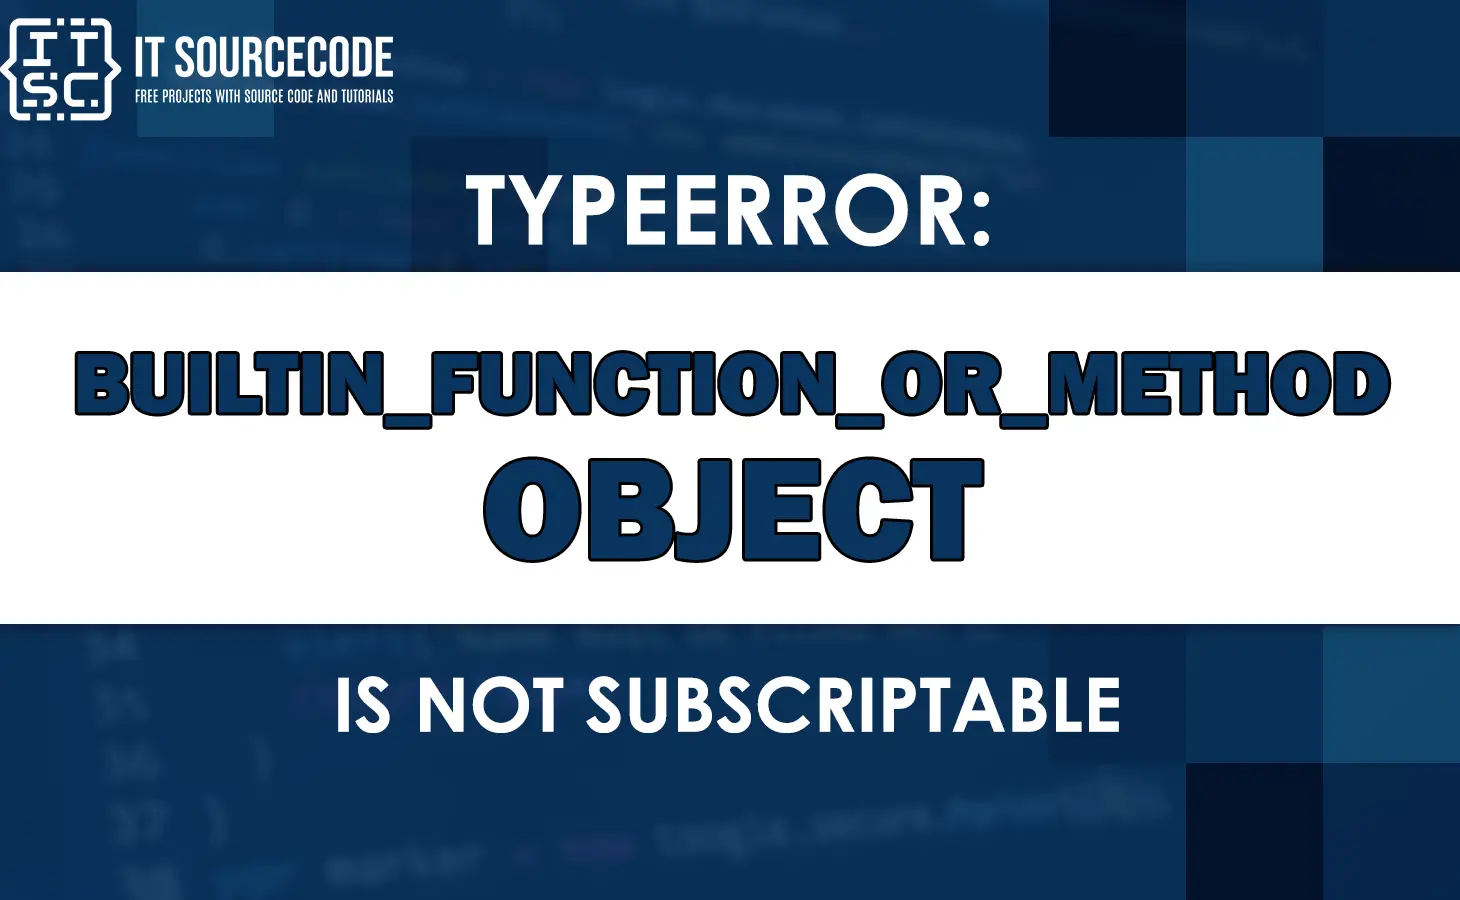 Typeerror: builtin_function_or_method object is not subscriptable